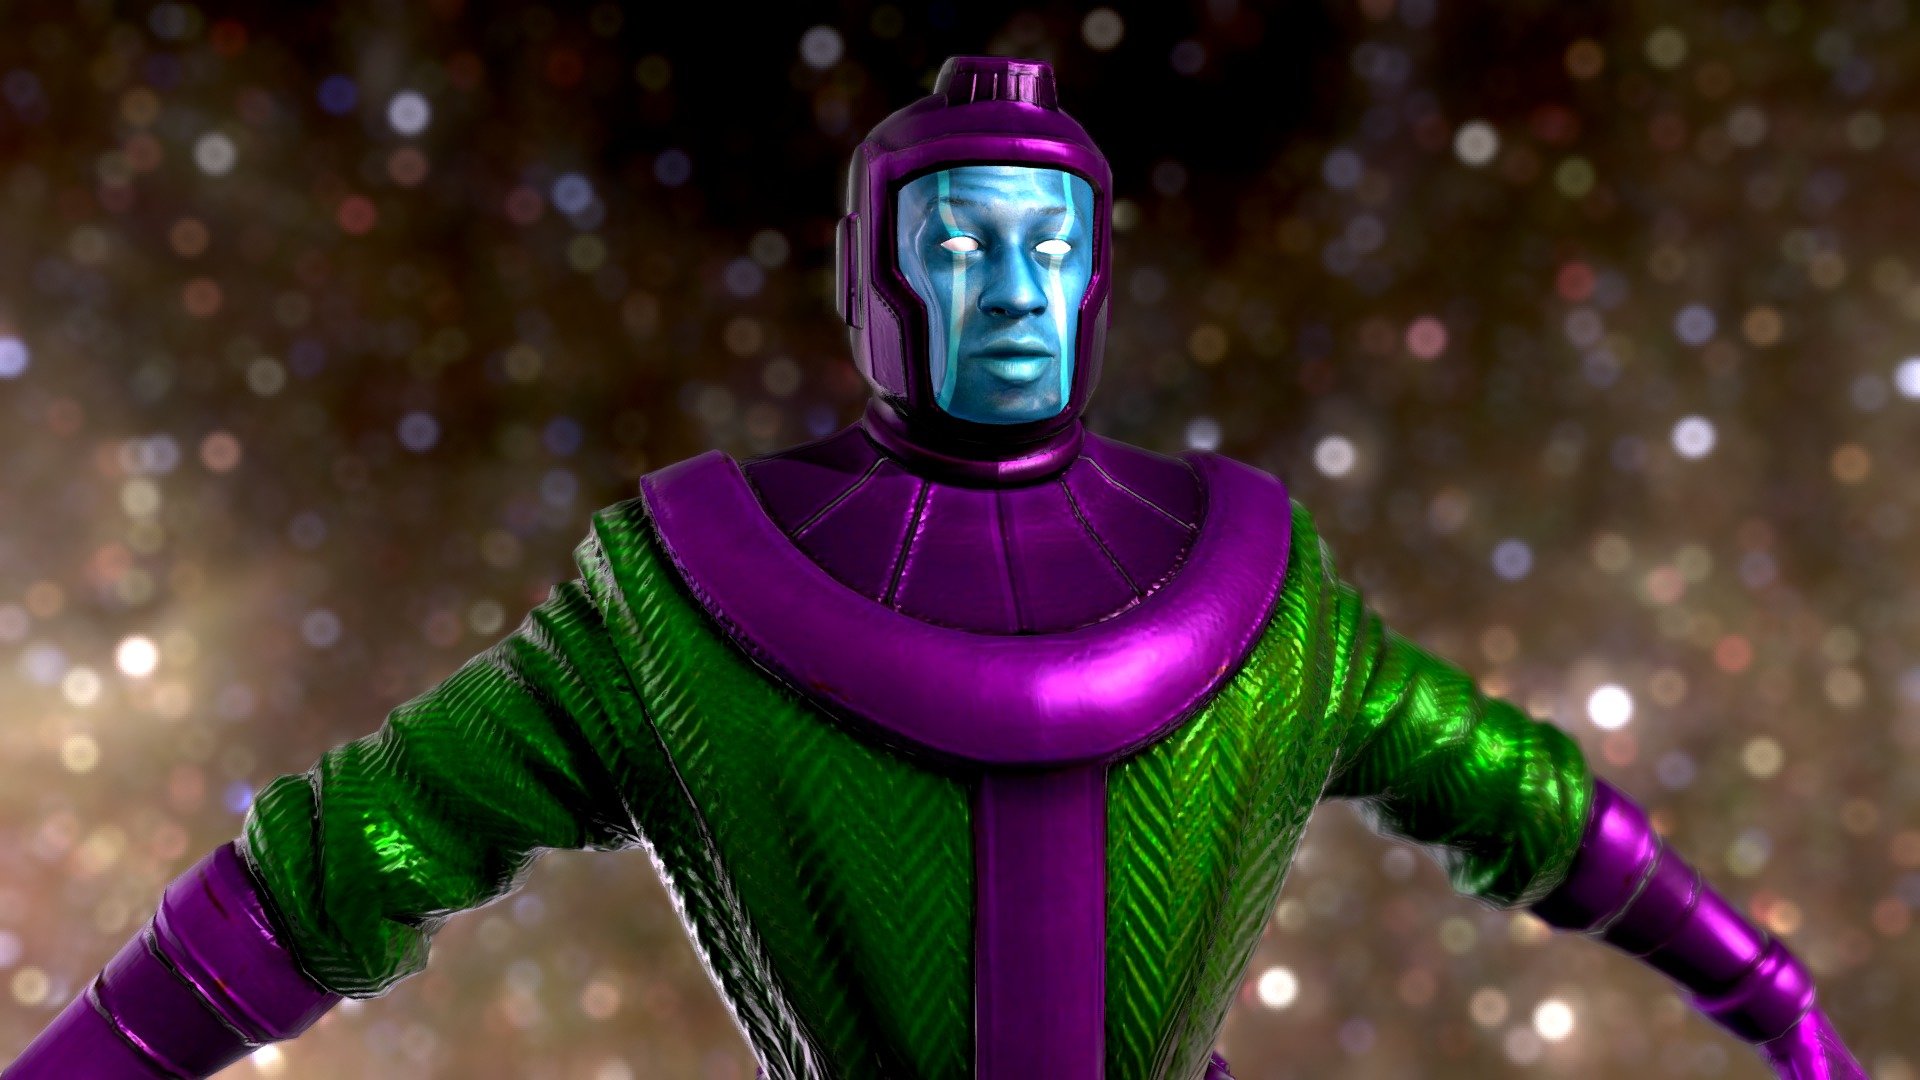 Kang the Conqueror is Here !!! ,A Classic Variant of Kang
Model Details : 
1)FBX and OBJ in ZIP file
2)Fully RIGGED
3)Game Ready Model
4)Animation Ready
**DM if you need any assistance or Details


kangtheconqueror #kangclassic #kang3dmodel - Kang The Conqueror - Jonathan Majors 3D Model - Buy Royalty Free 3D model by Ak Creations (@akcreations) 3d model